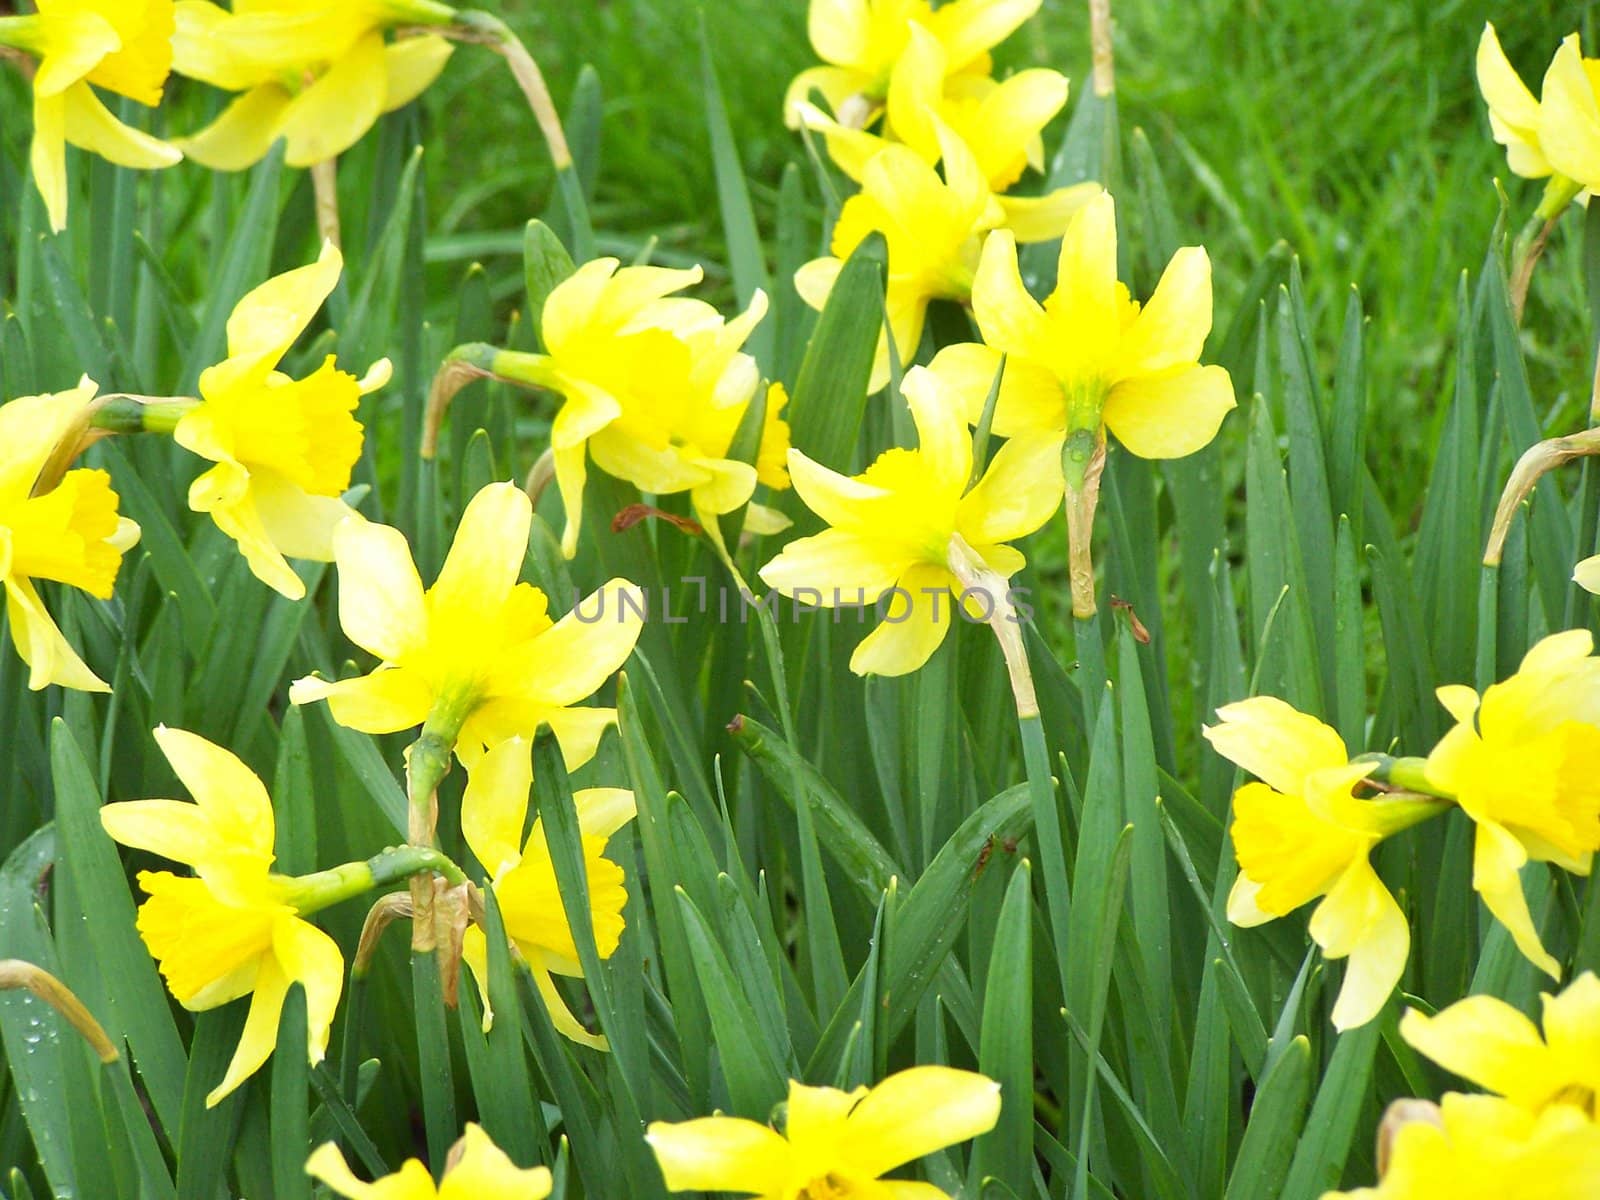 Yellow daffodiles. Green grass. Close up. Outdoors.